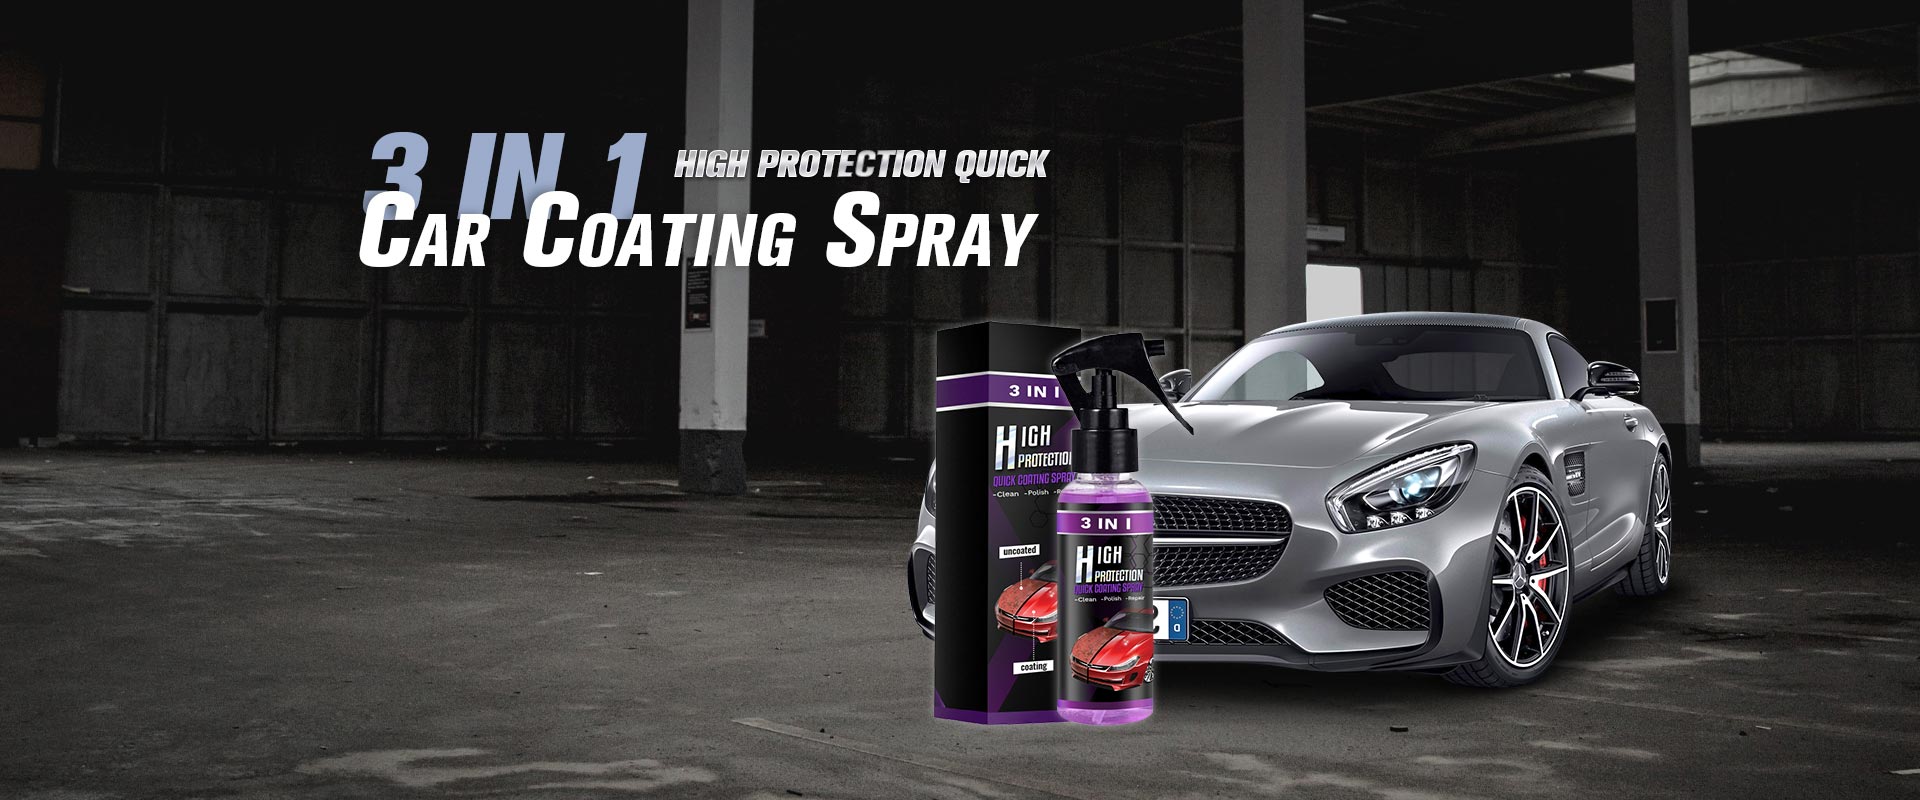 3 in 1 High Protection Quick Car Coating Spray – HERESIO